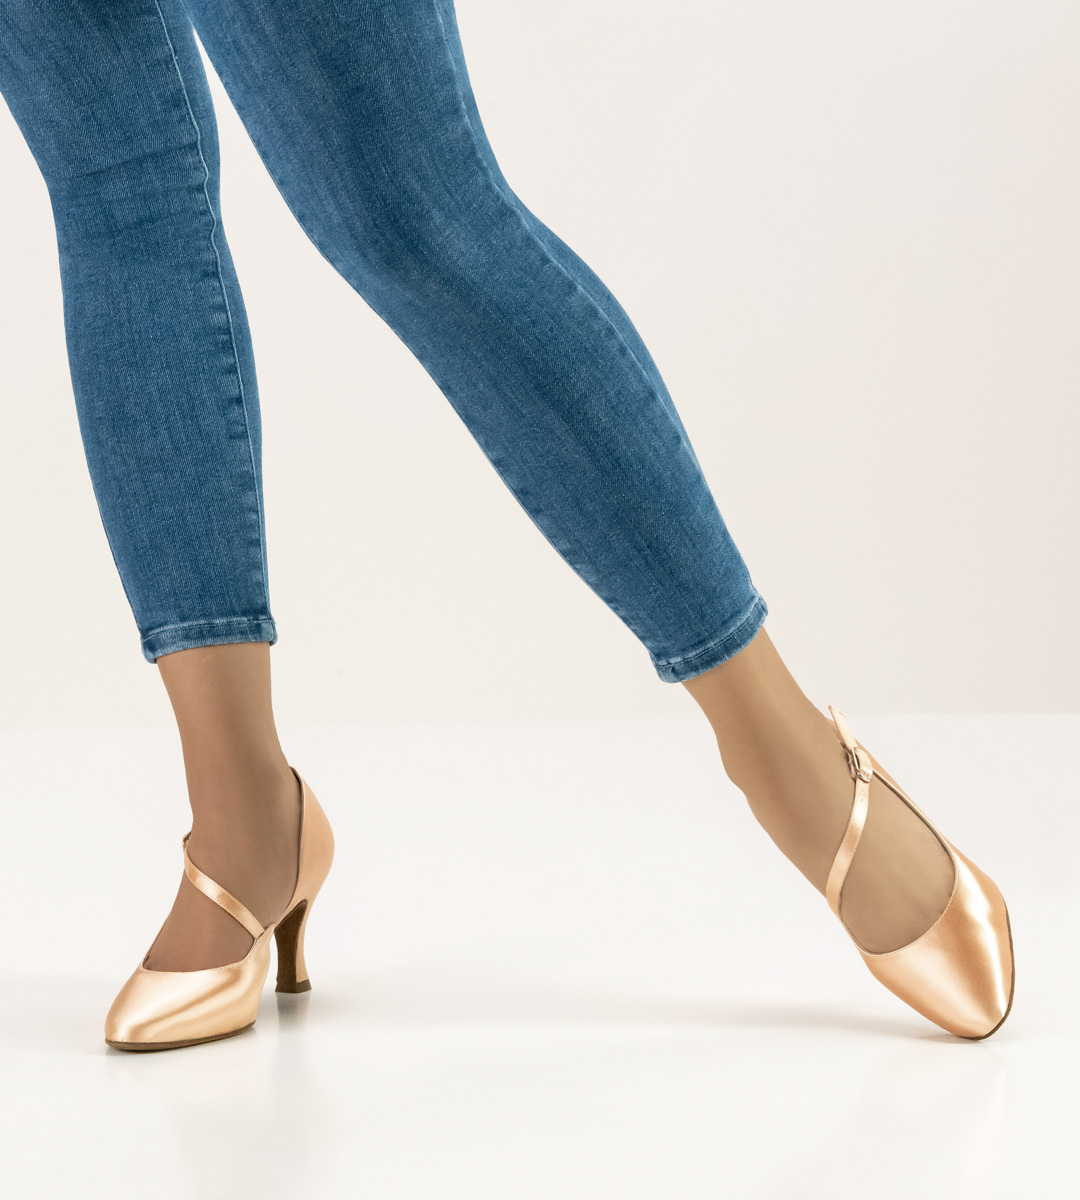 Blue jeans in combination with Werner Kern women's dance shoe in satin